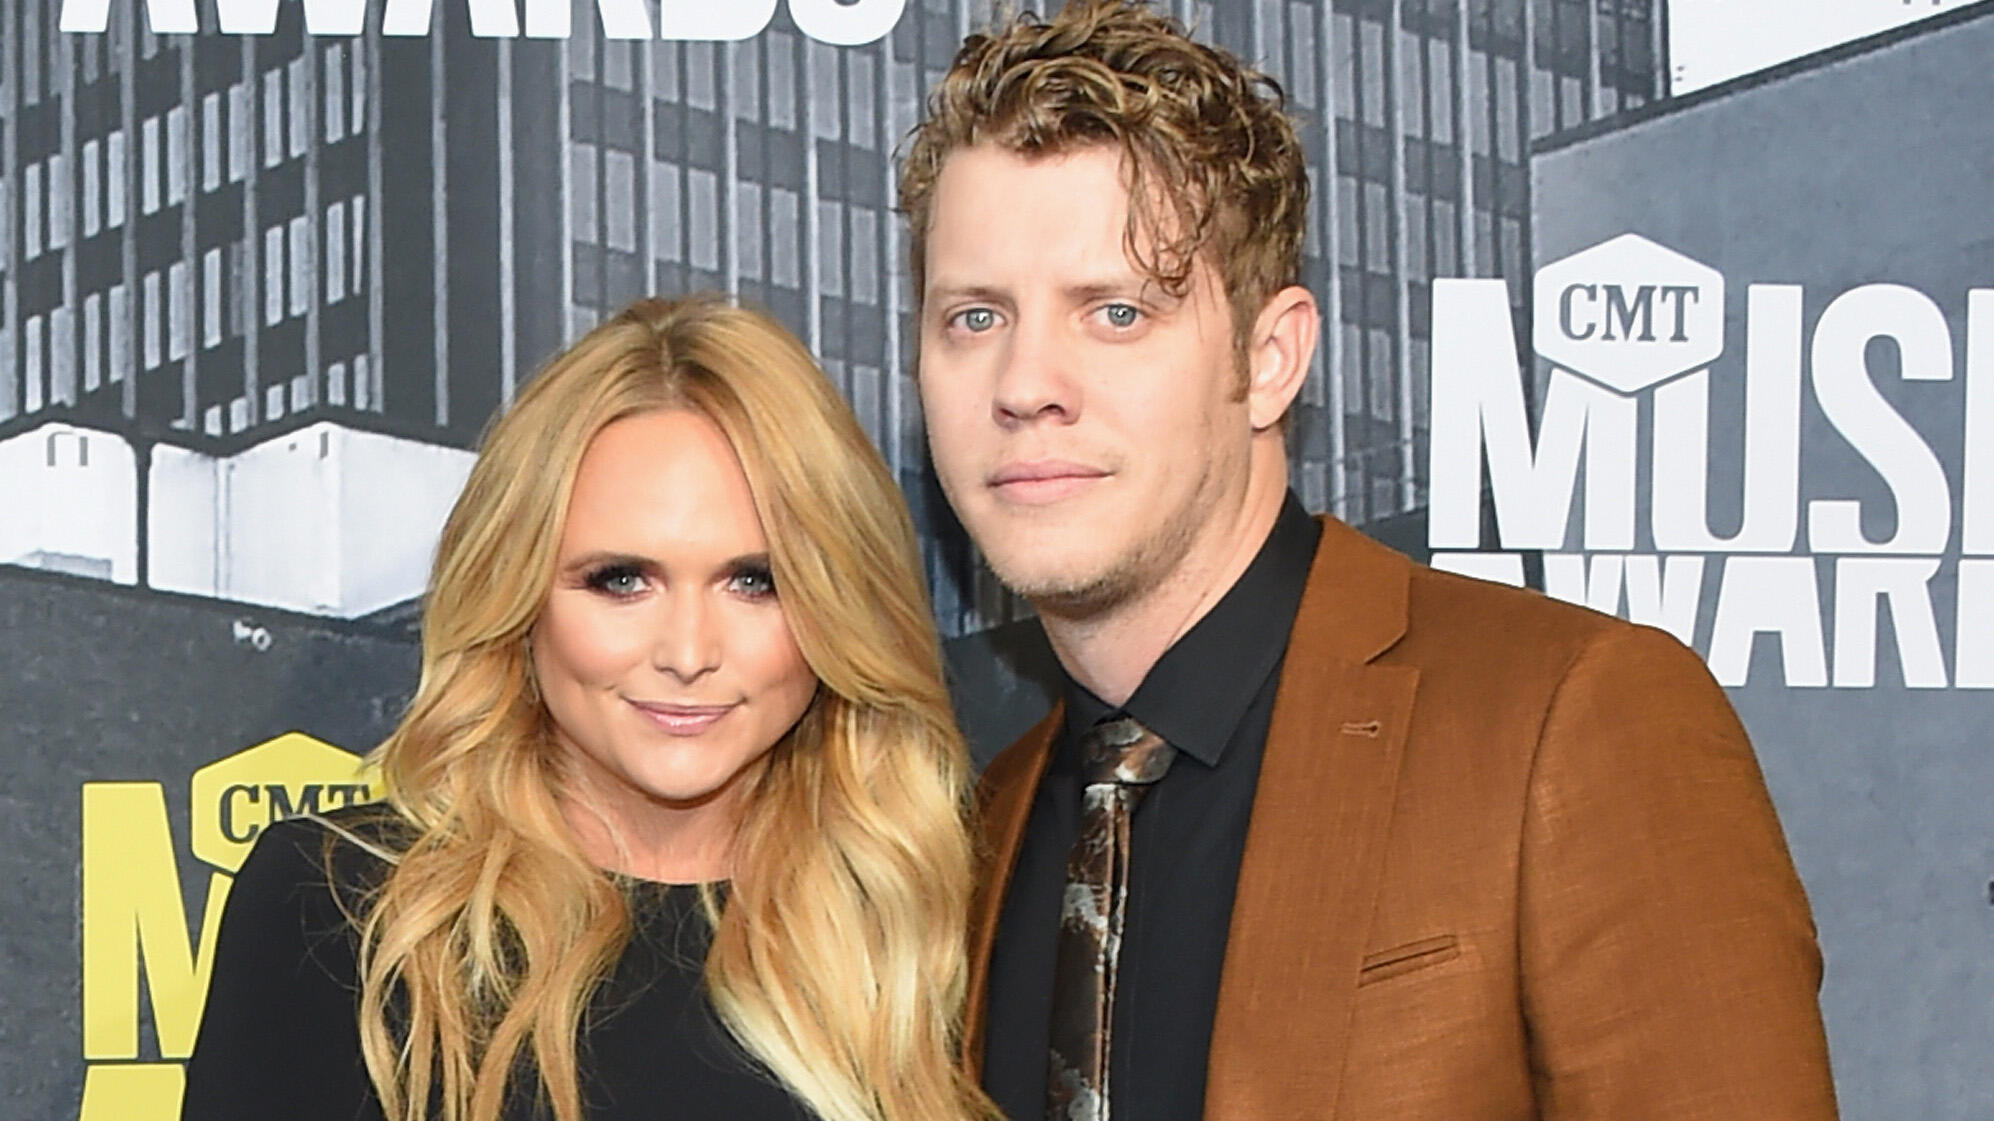 NASHVILLE, TN - JUNE 07:  Singer-songwriters Miranda Lambert and Anderson East attend the 2017 CMT Music awards at the Music City Center on June 7, 2017 in Nashville, Tennessee.  (Photo by Michael Loccisano/Getty Images For CMT)